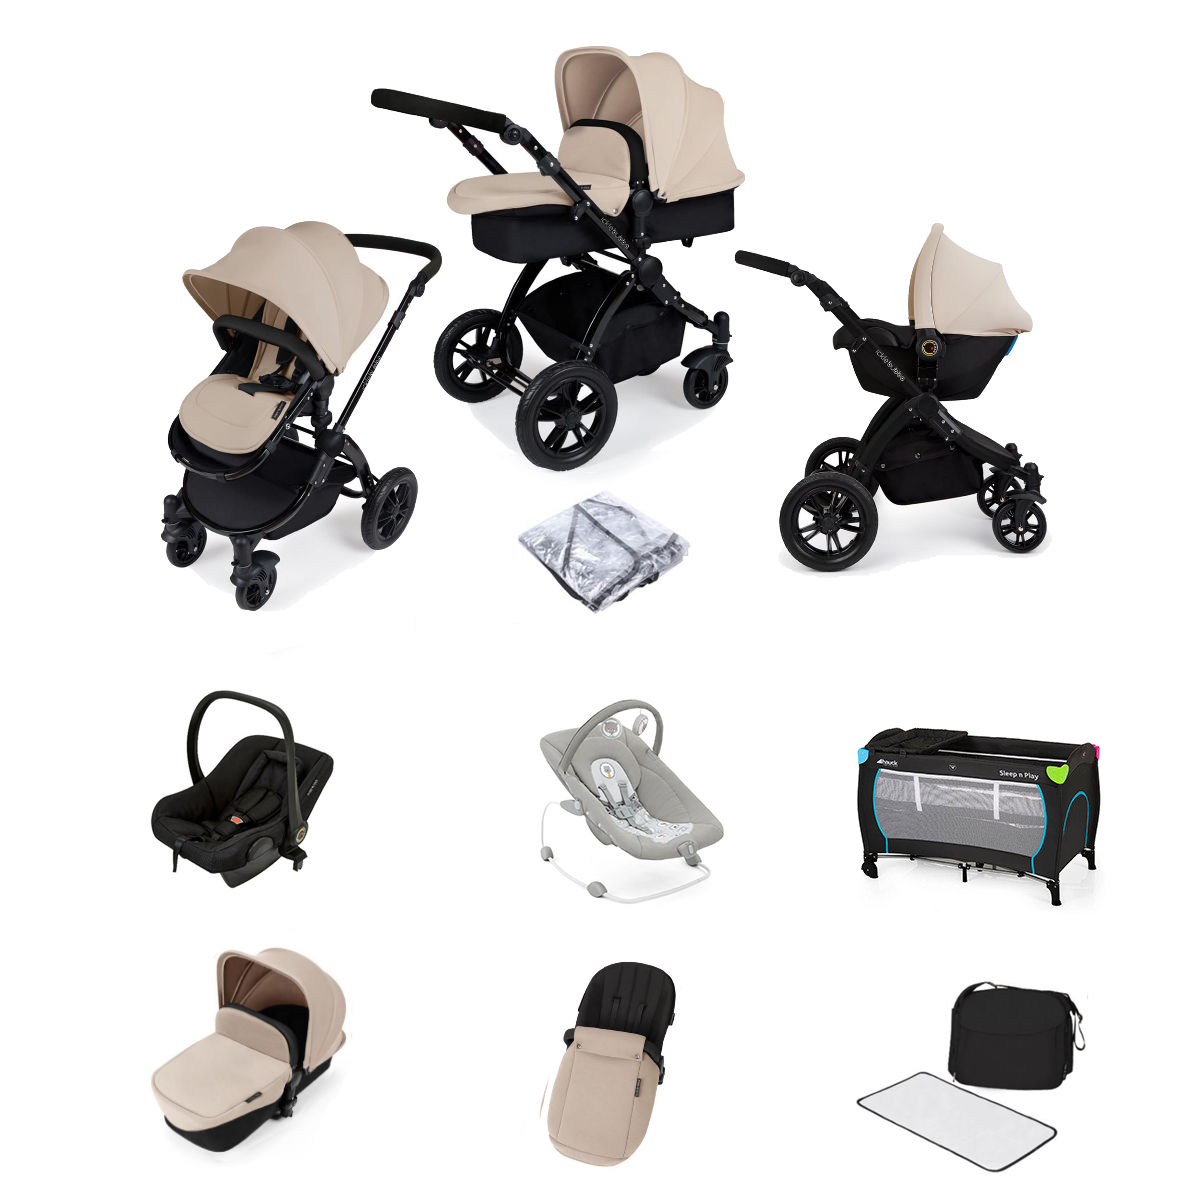 Ickle Bubba Stomp V2 (Black Frame) All In One (Astral) 9 Piece Travel System Bundle - Sand